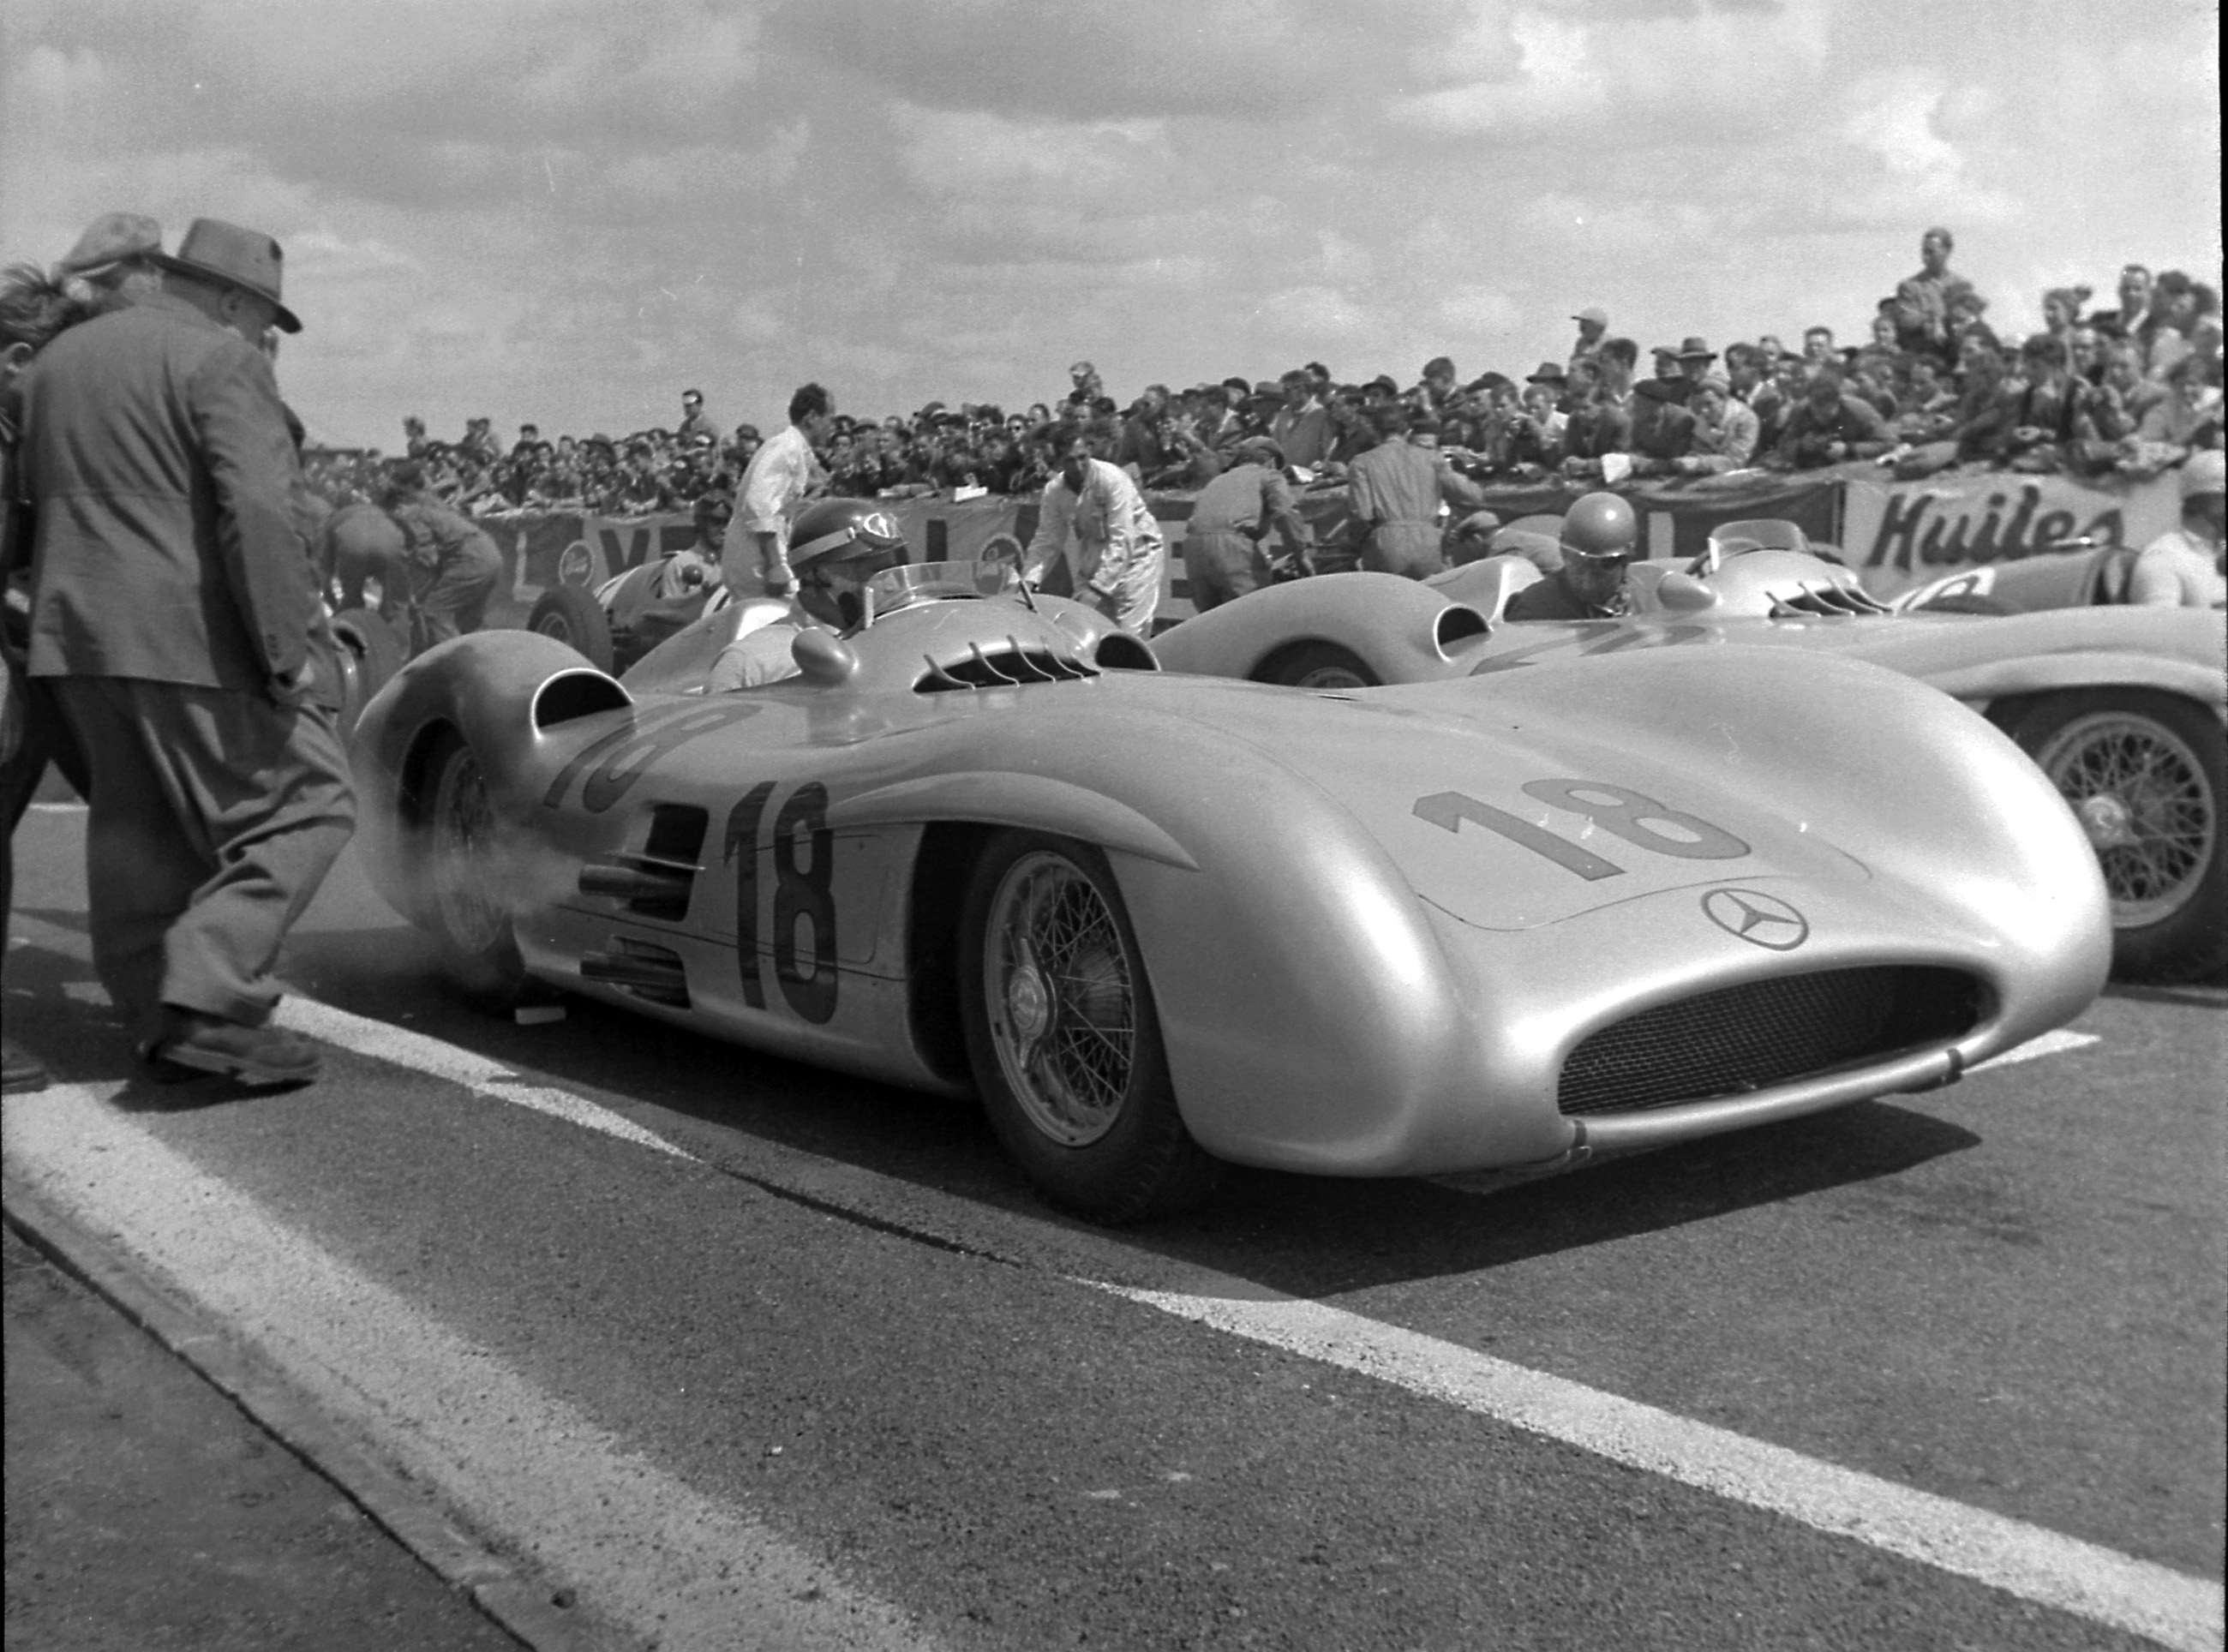 Fangio’s second World Championship title was won by him in 1954 when he won early-season GPs in the works Maserati 250F, followed by mid-to-late season GPs in the new, initially streamline-bodied, Mercedes-Benz W196s… as here on the starting grid for the 1954 French GP, which he won.